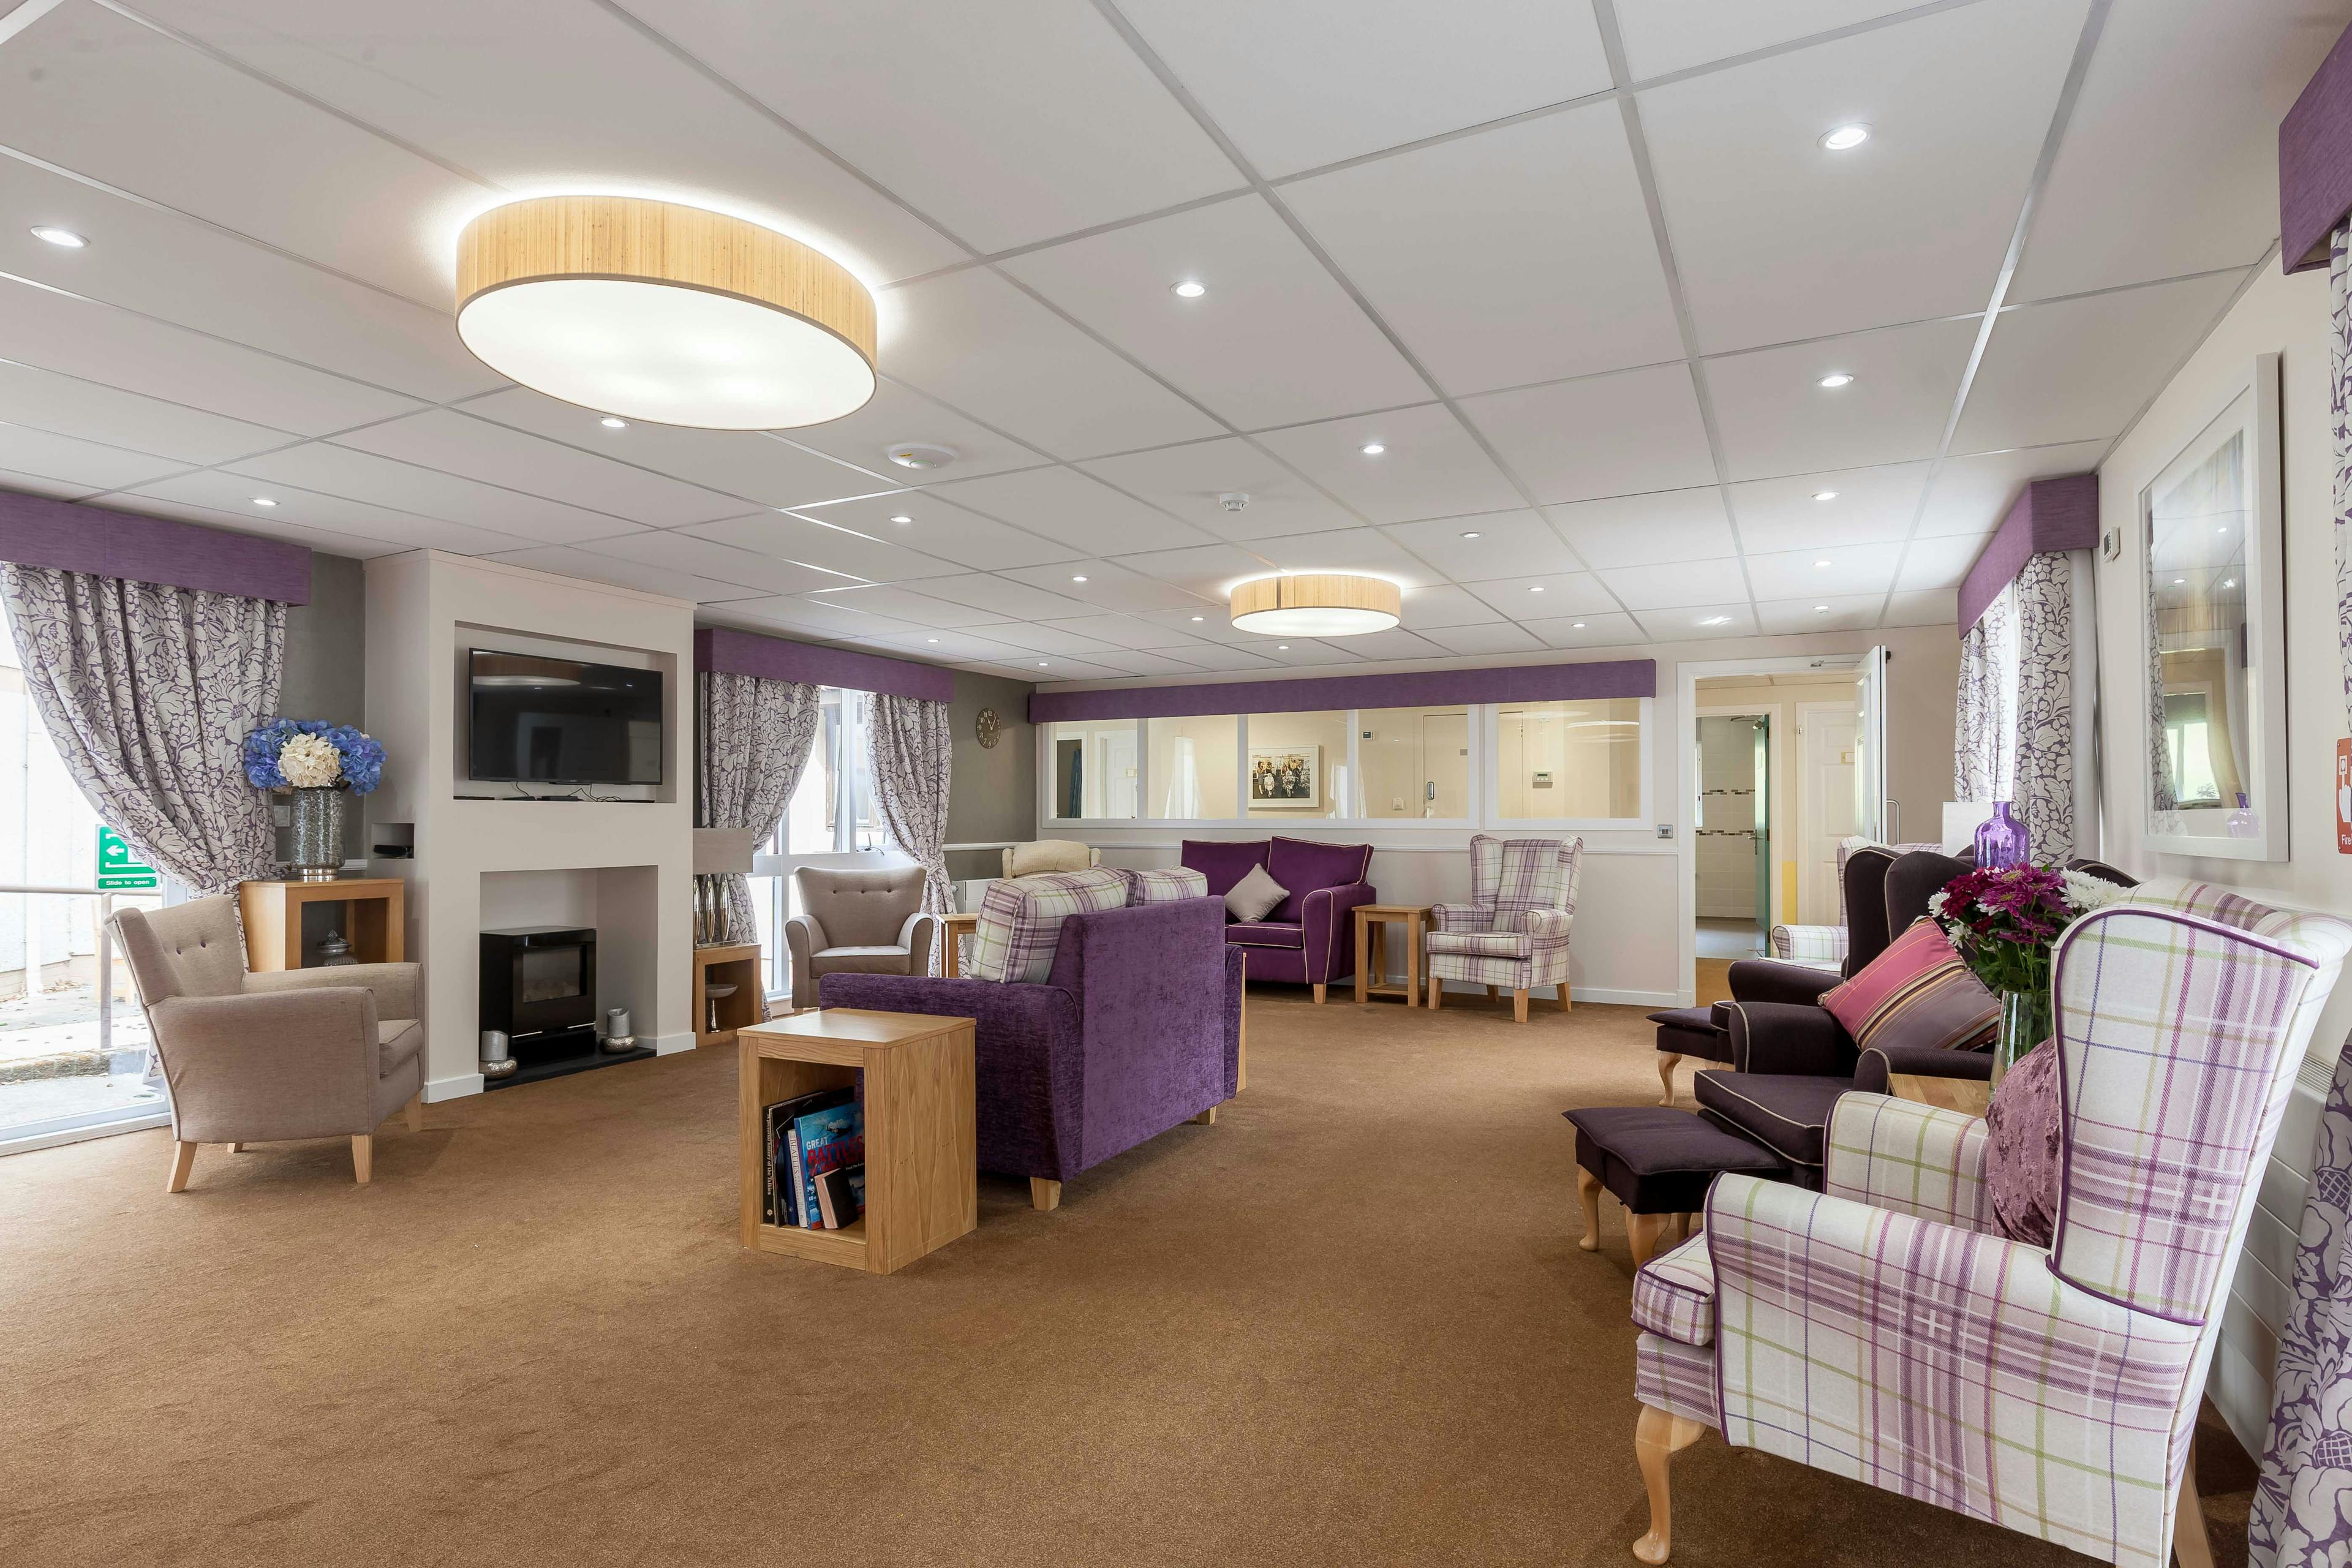 Communal Area of Fairview House Care Home in Aberdeen, Scotland